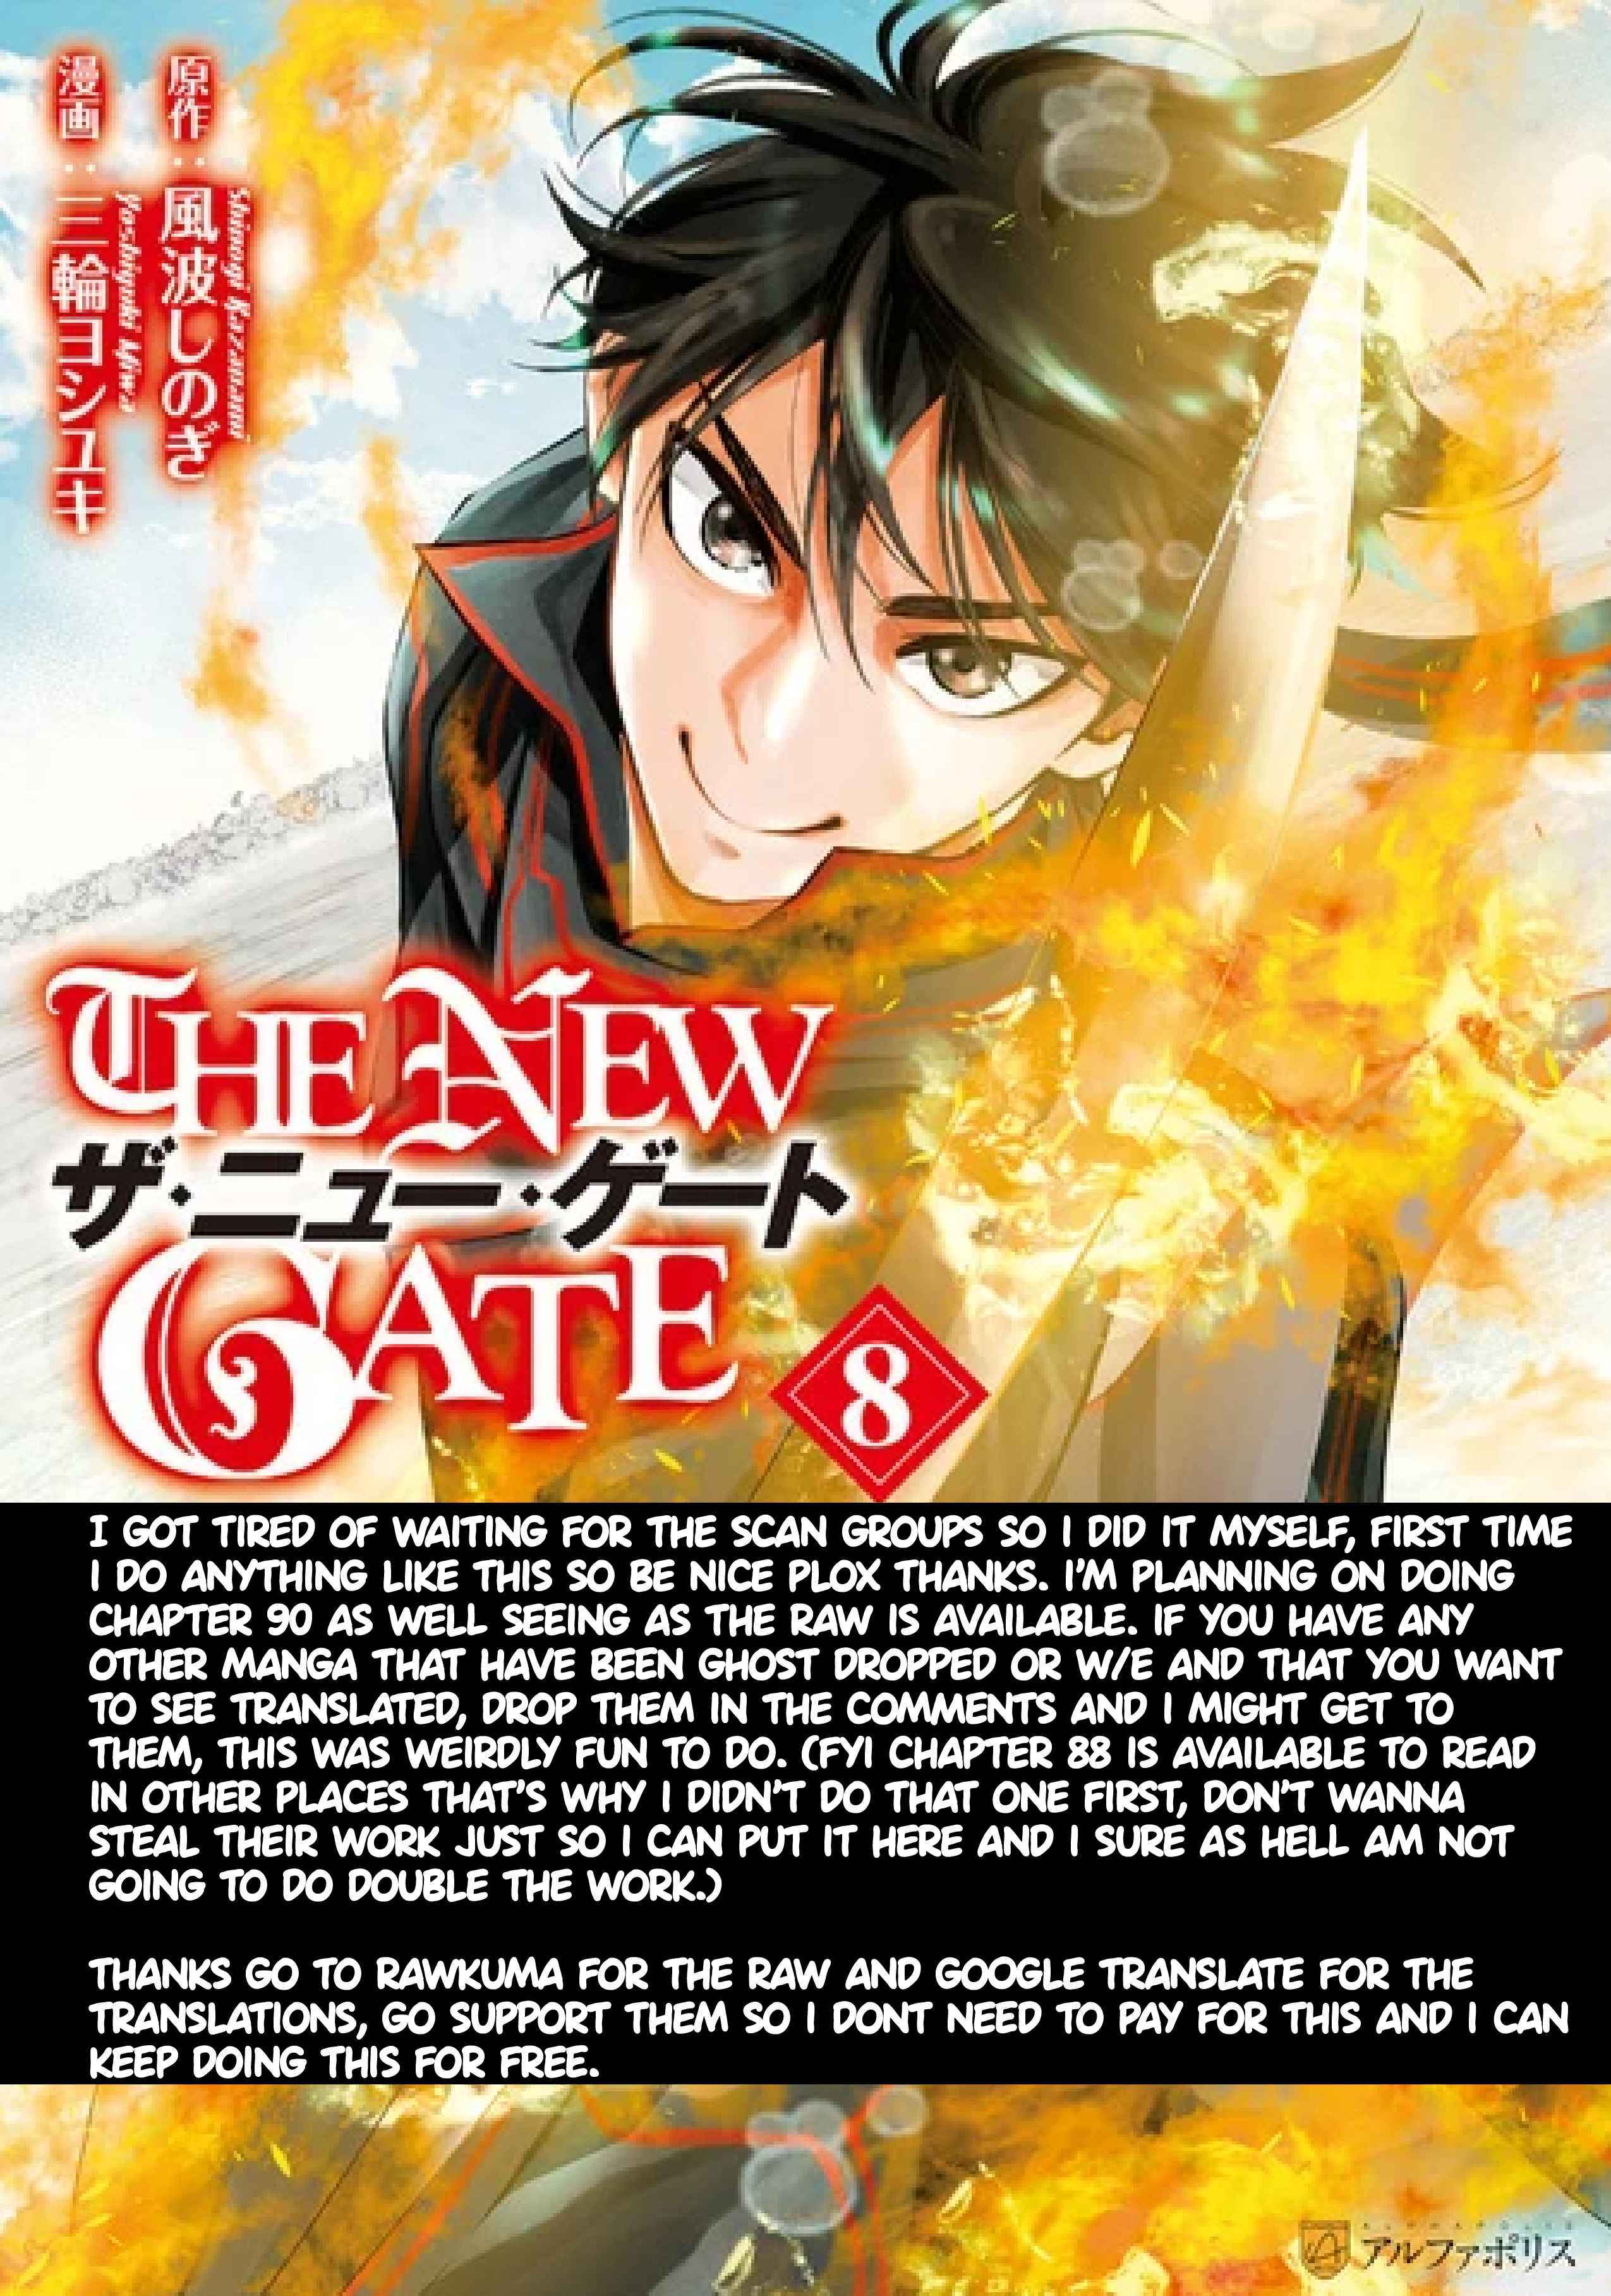 THE NEW GATE Vol. 20 Chapter 1 Part 3 – Shin Translations